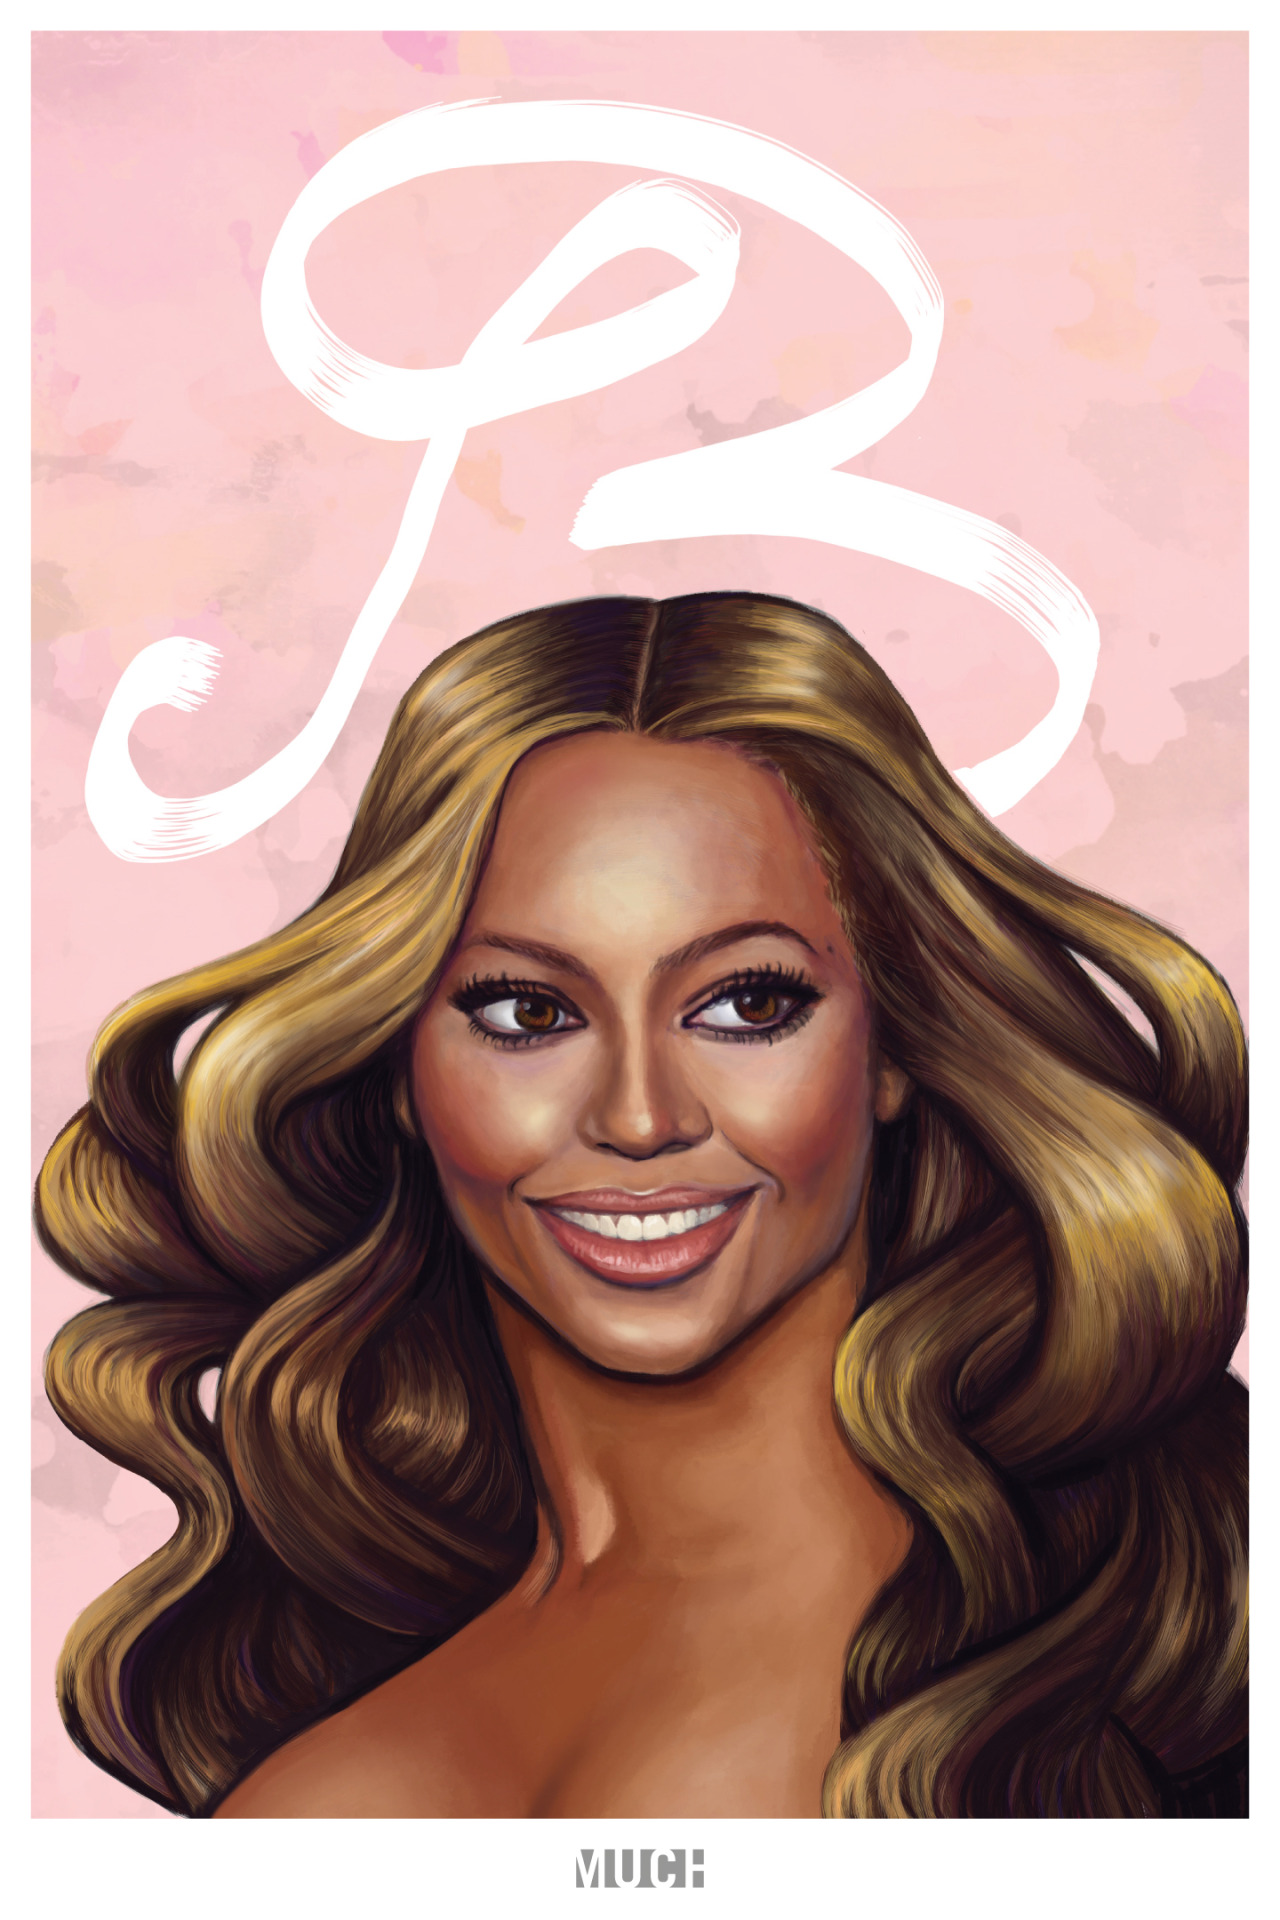 30 Years of Much: Beyoncé
(Click HERE for more on these limited edition prints.)